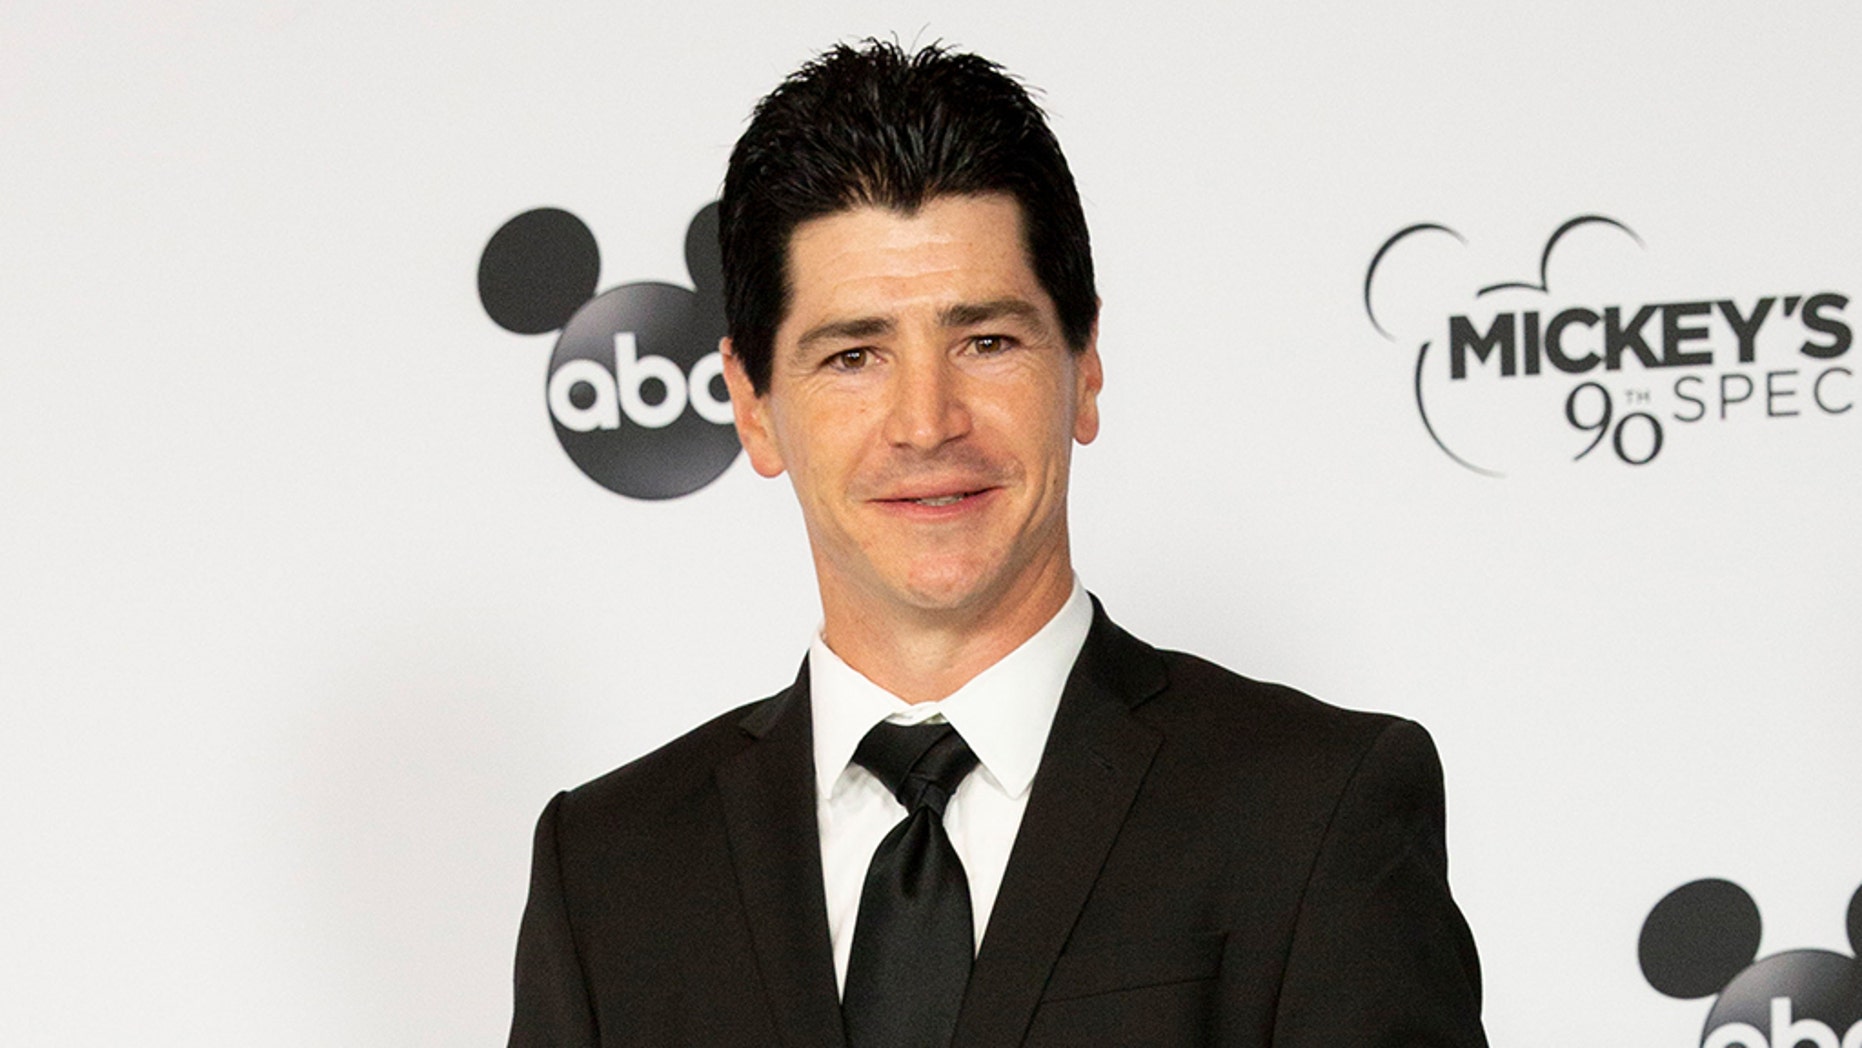 Michael Fishman, who plays D.J. Conner on 